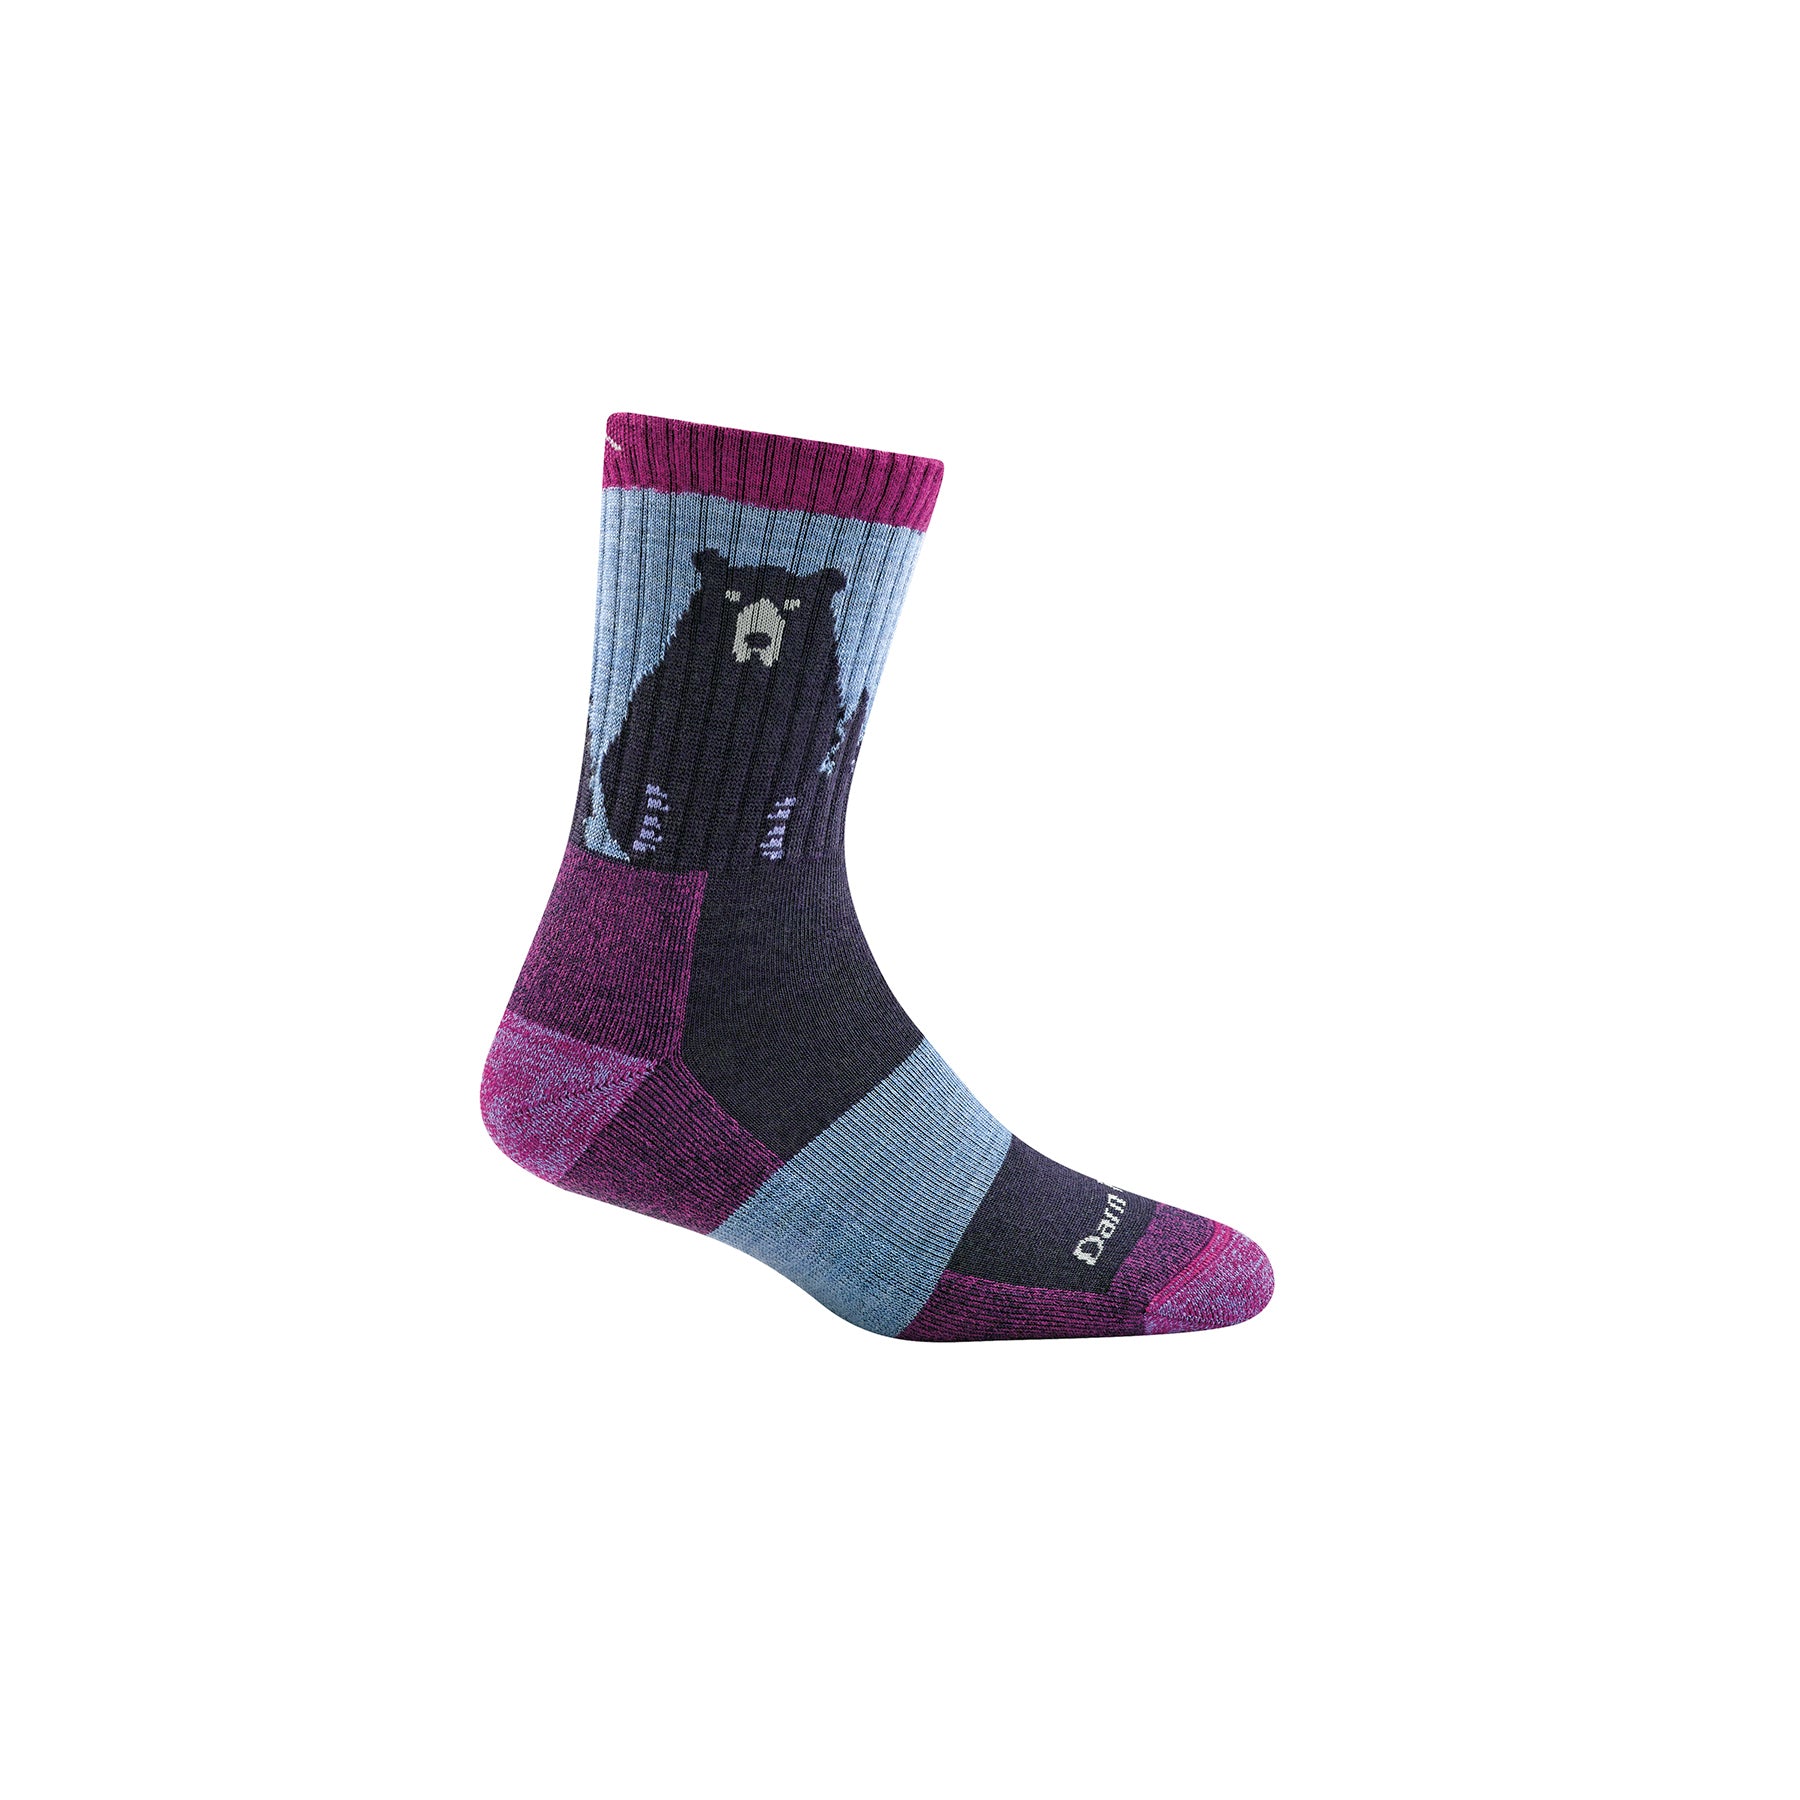 sideview of bear town light cushion women's in purple and blue with bear graphic on ankles